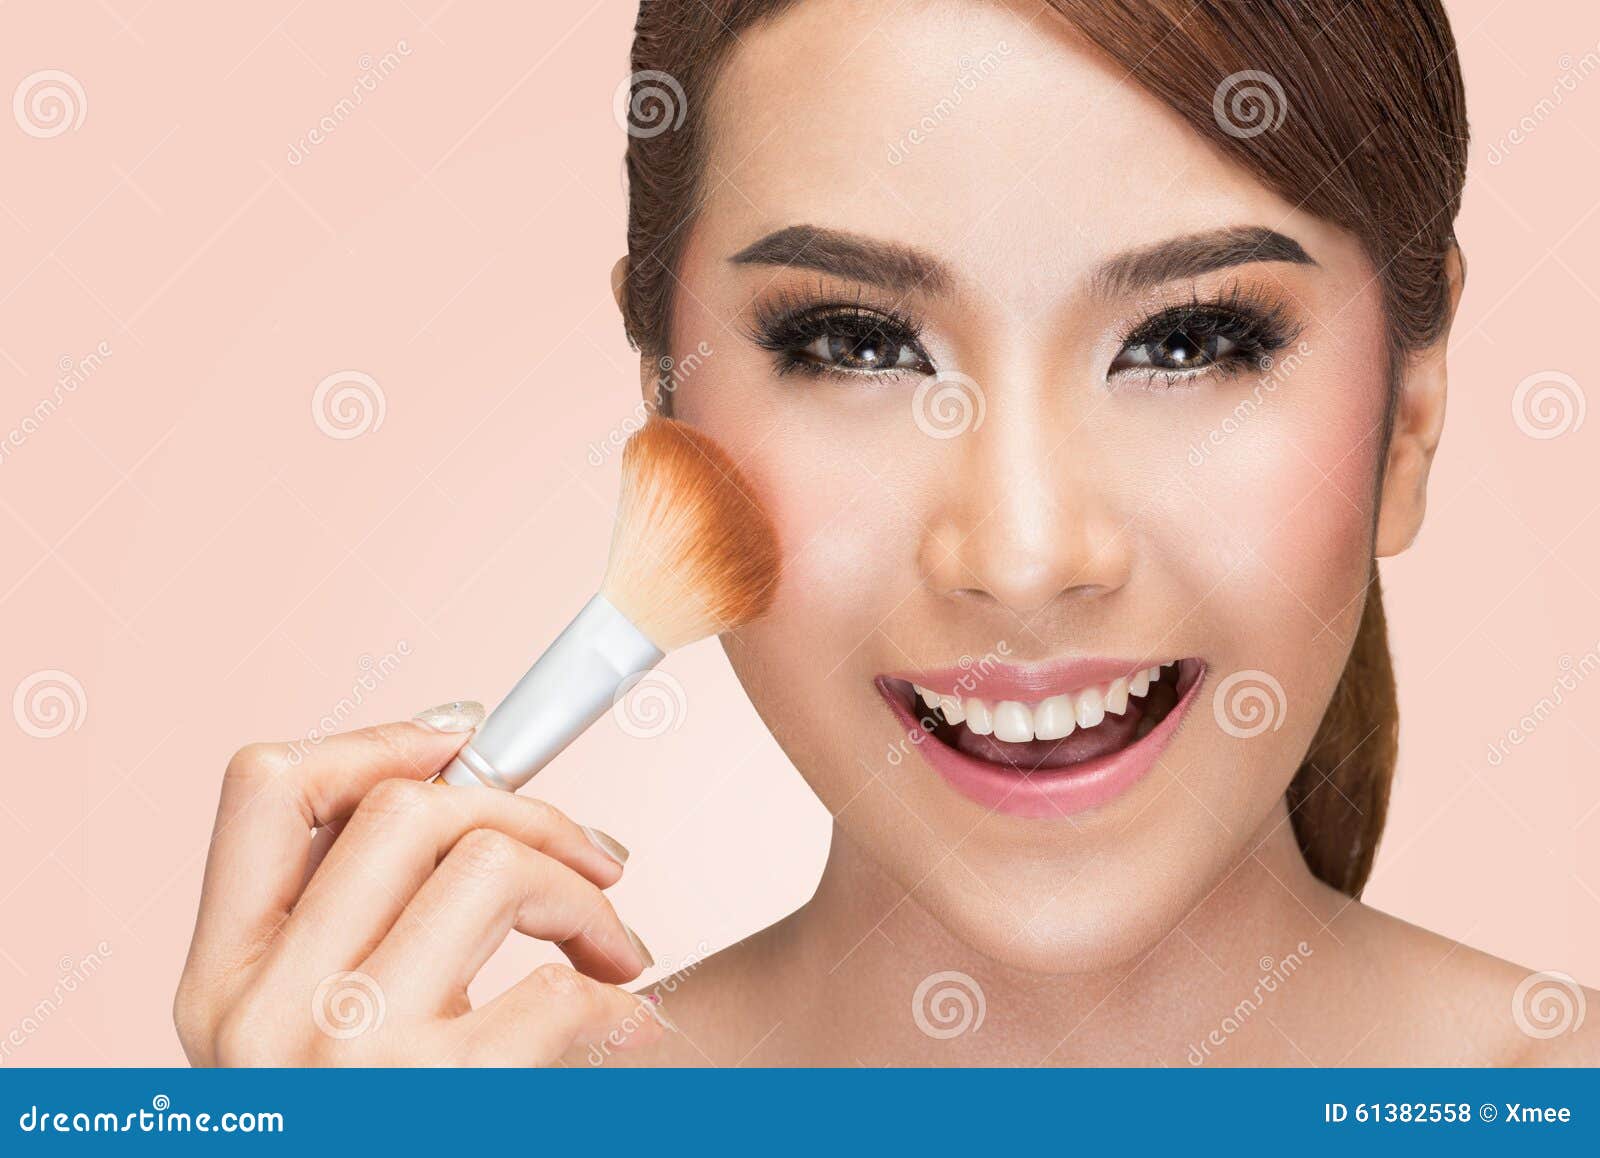 Cosmetics For Asian Women With 33